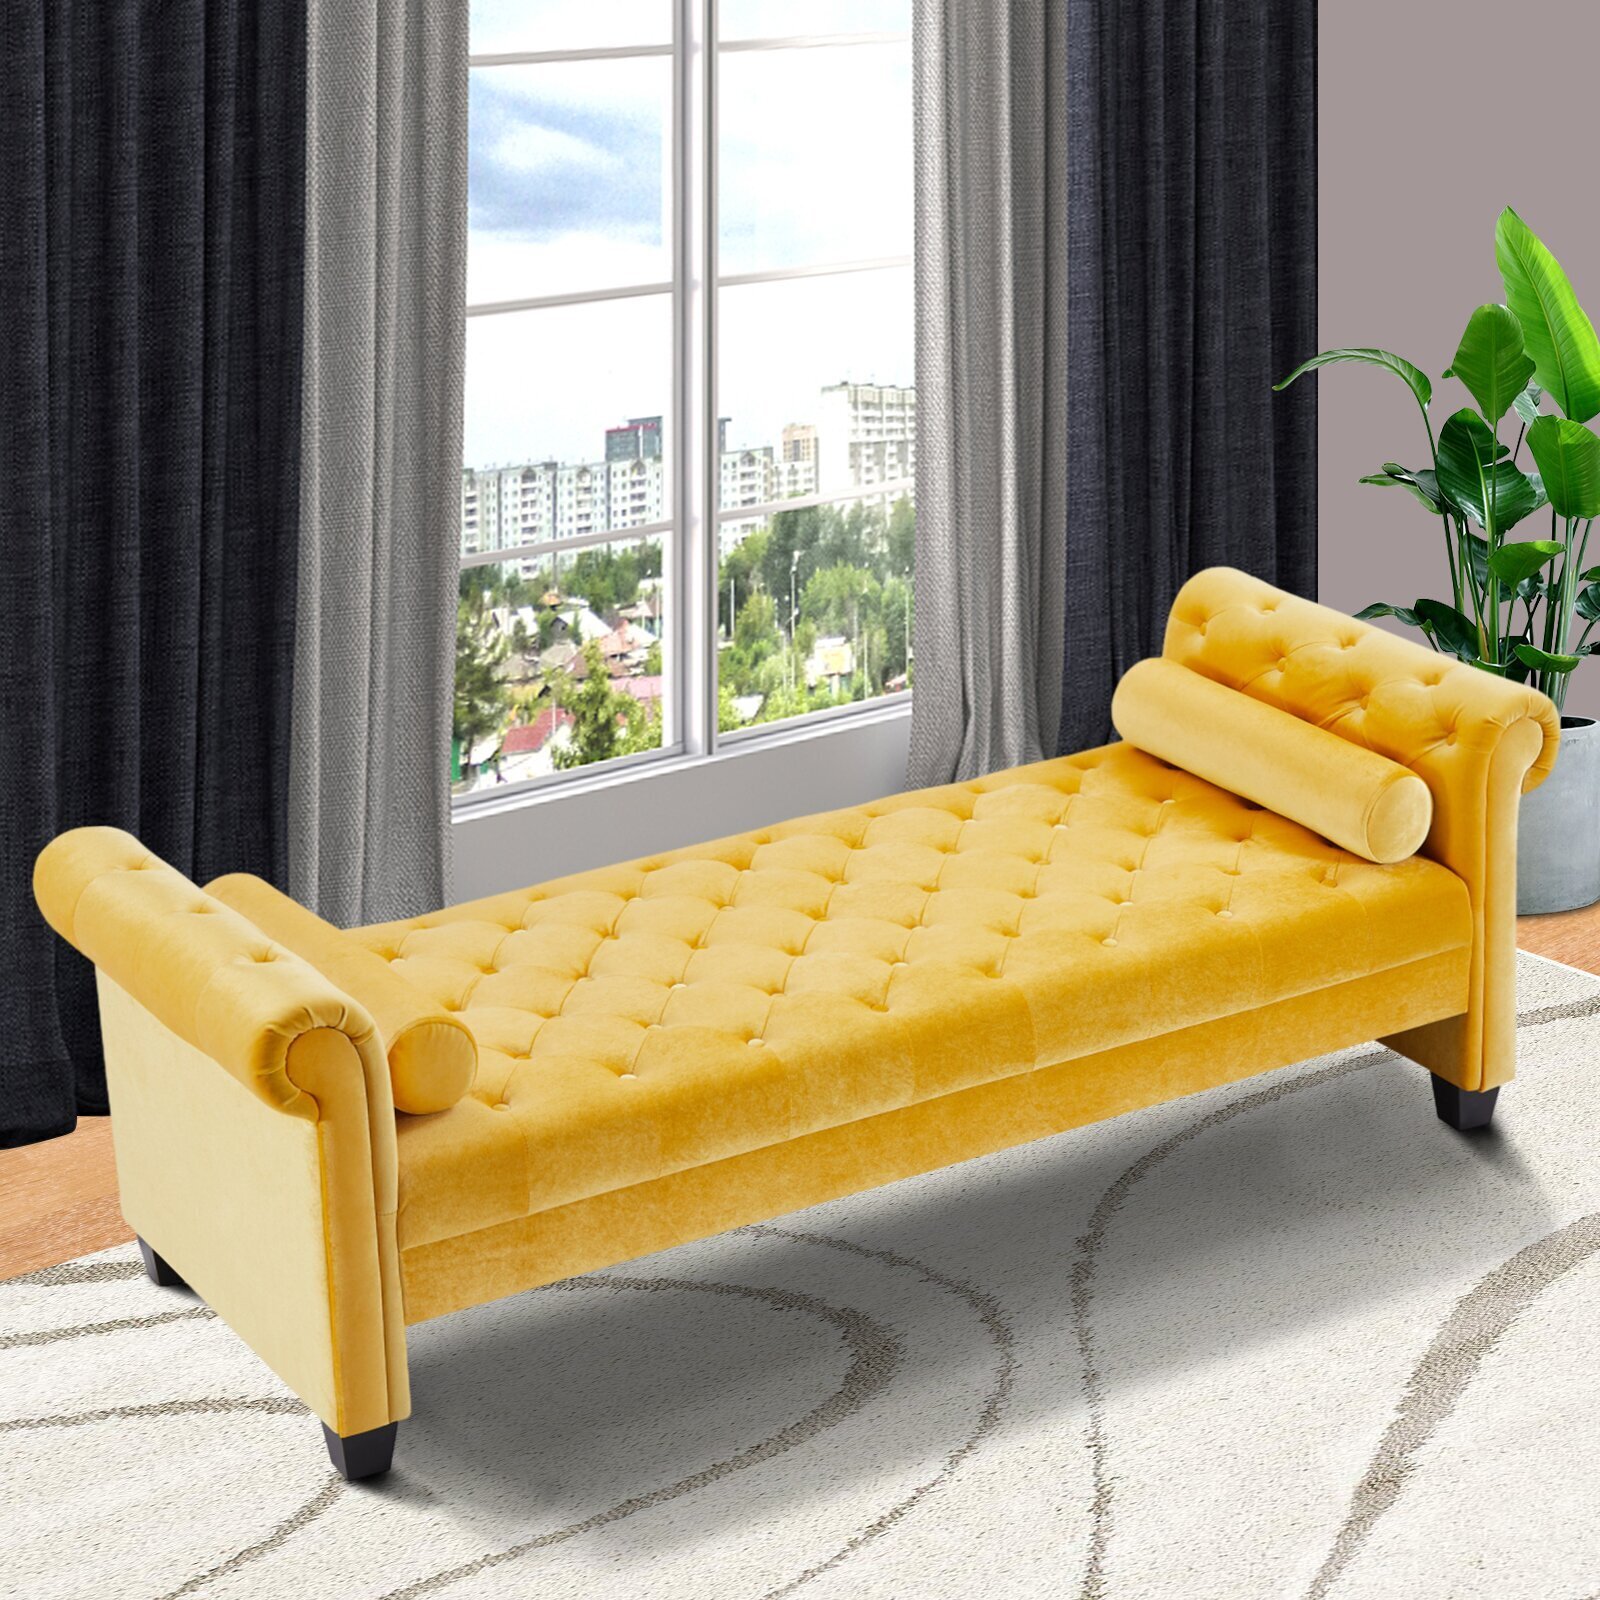 Luxury backless chaise lounge